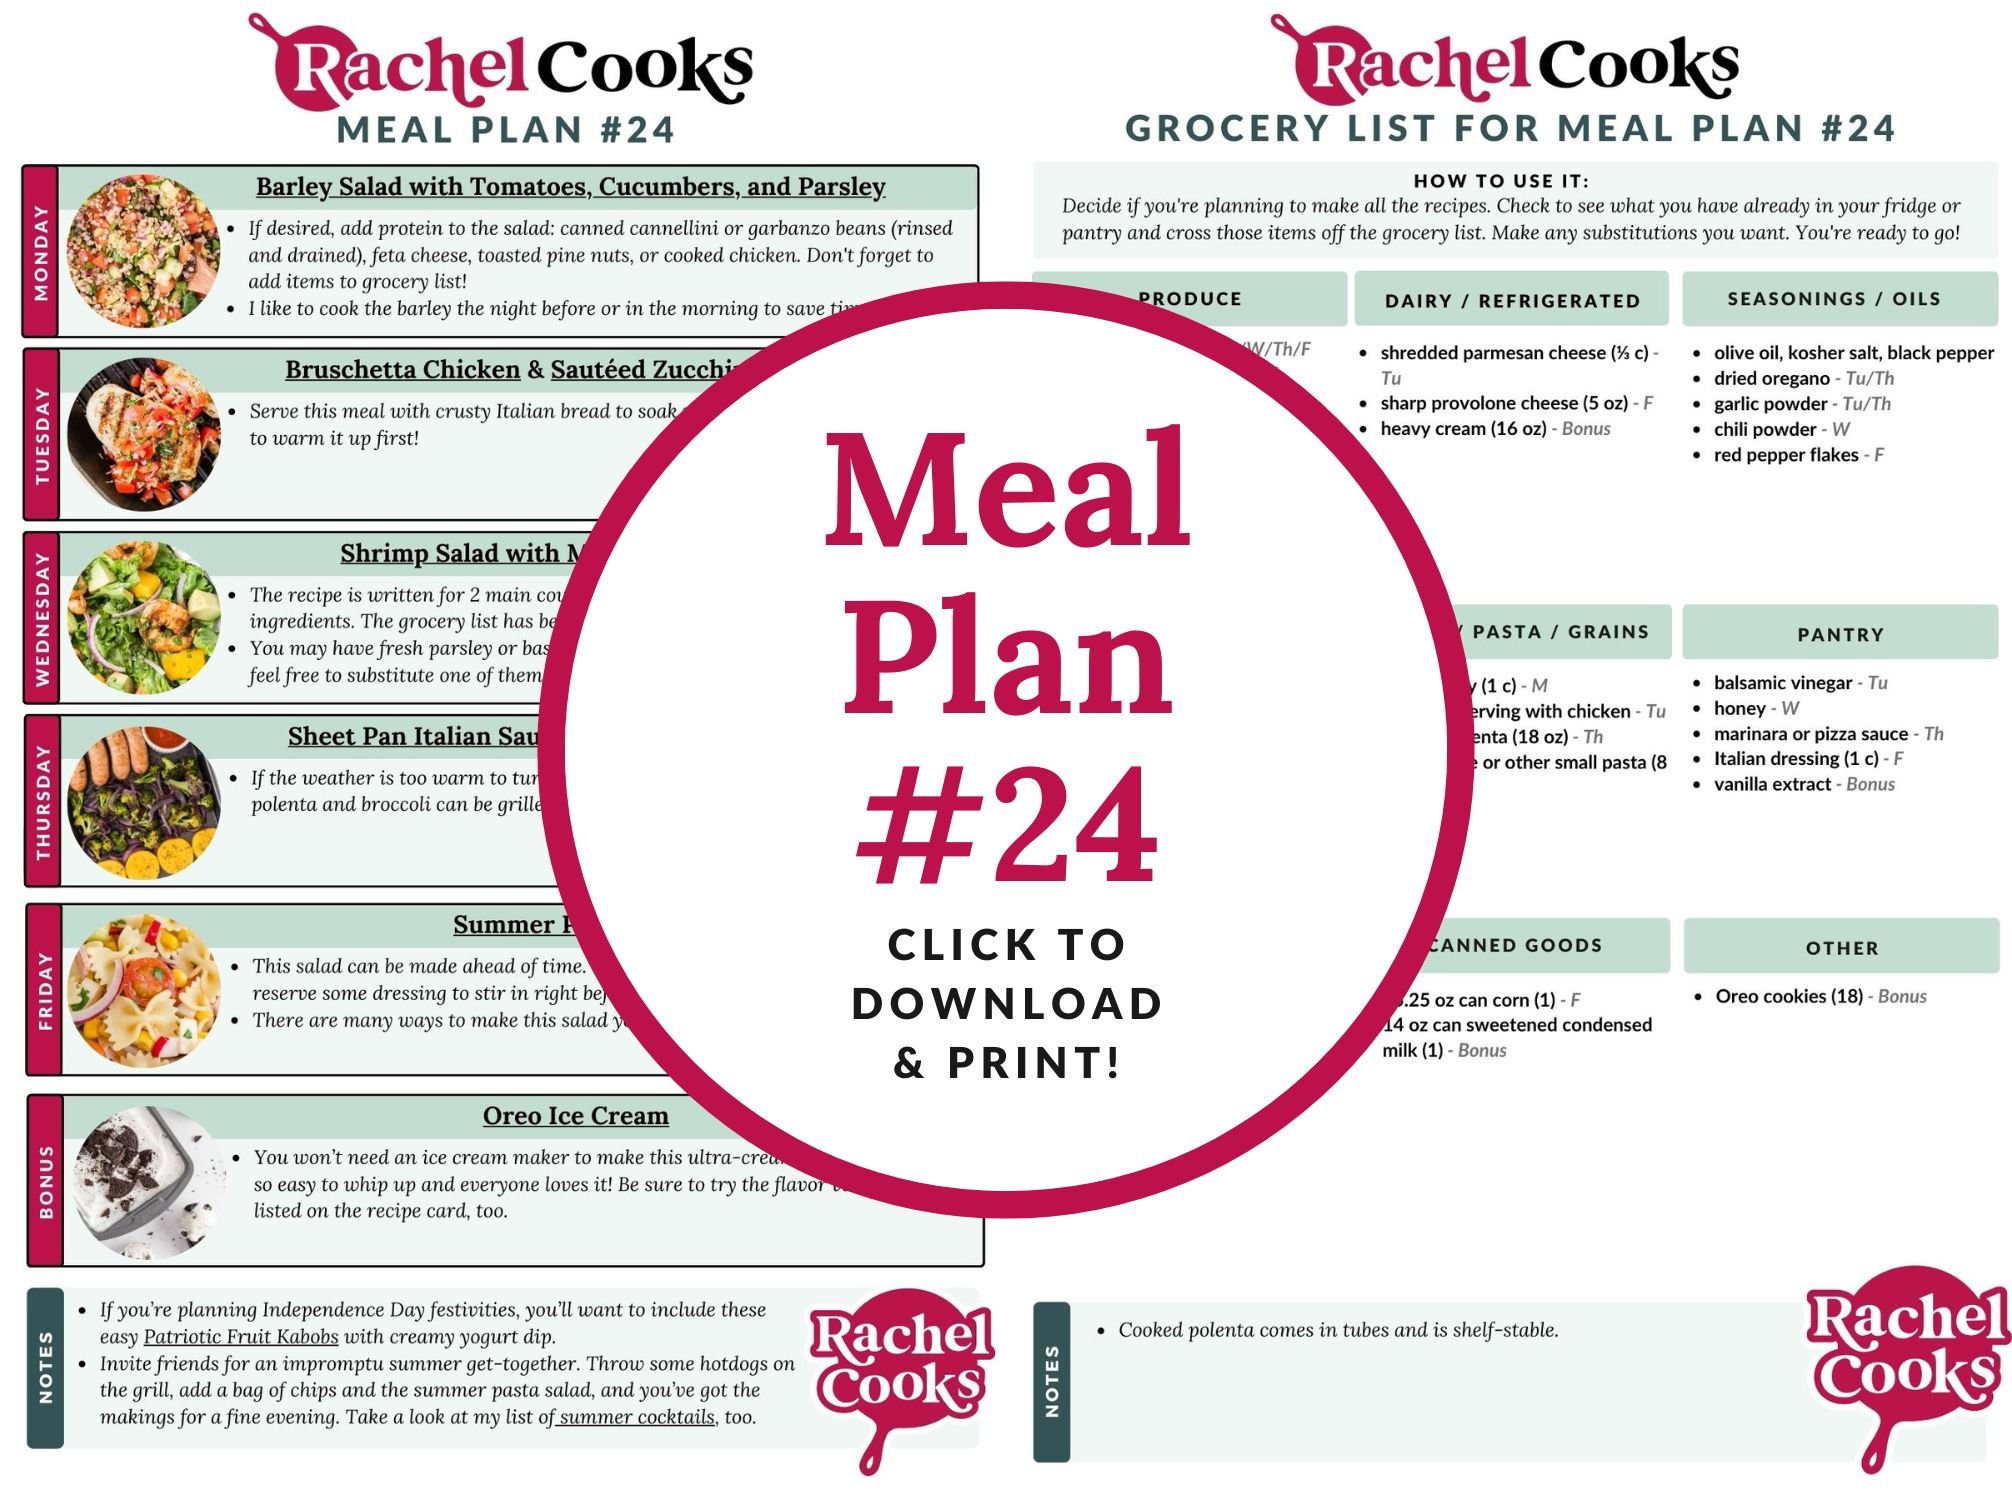 Meal plan 24 preview image.